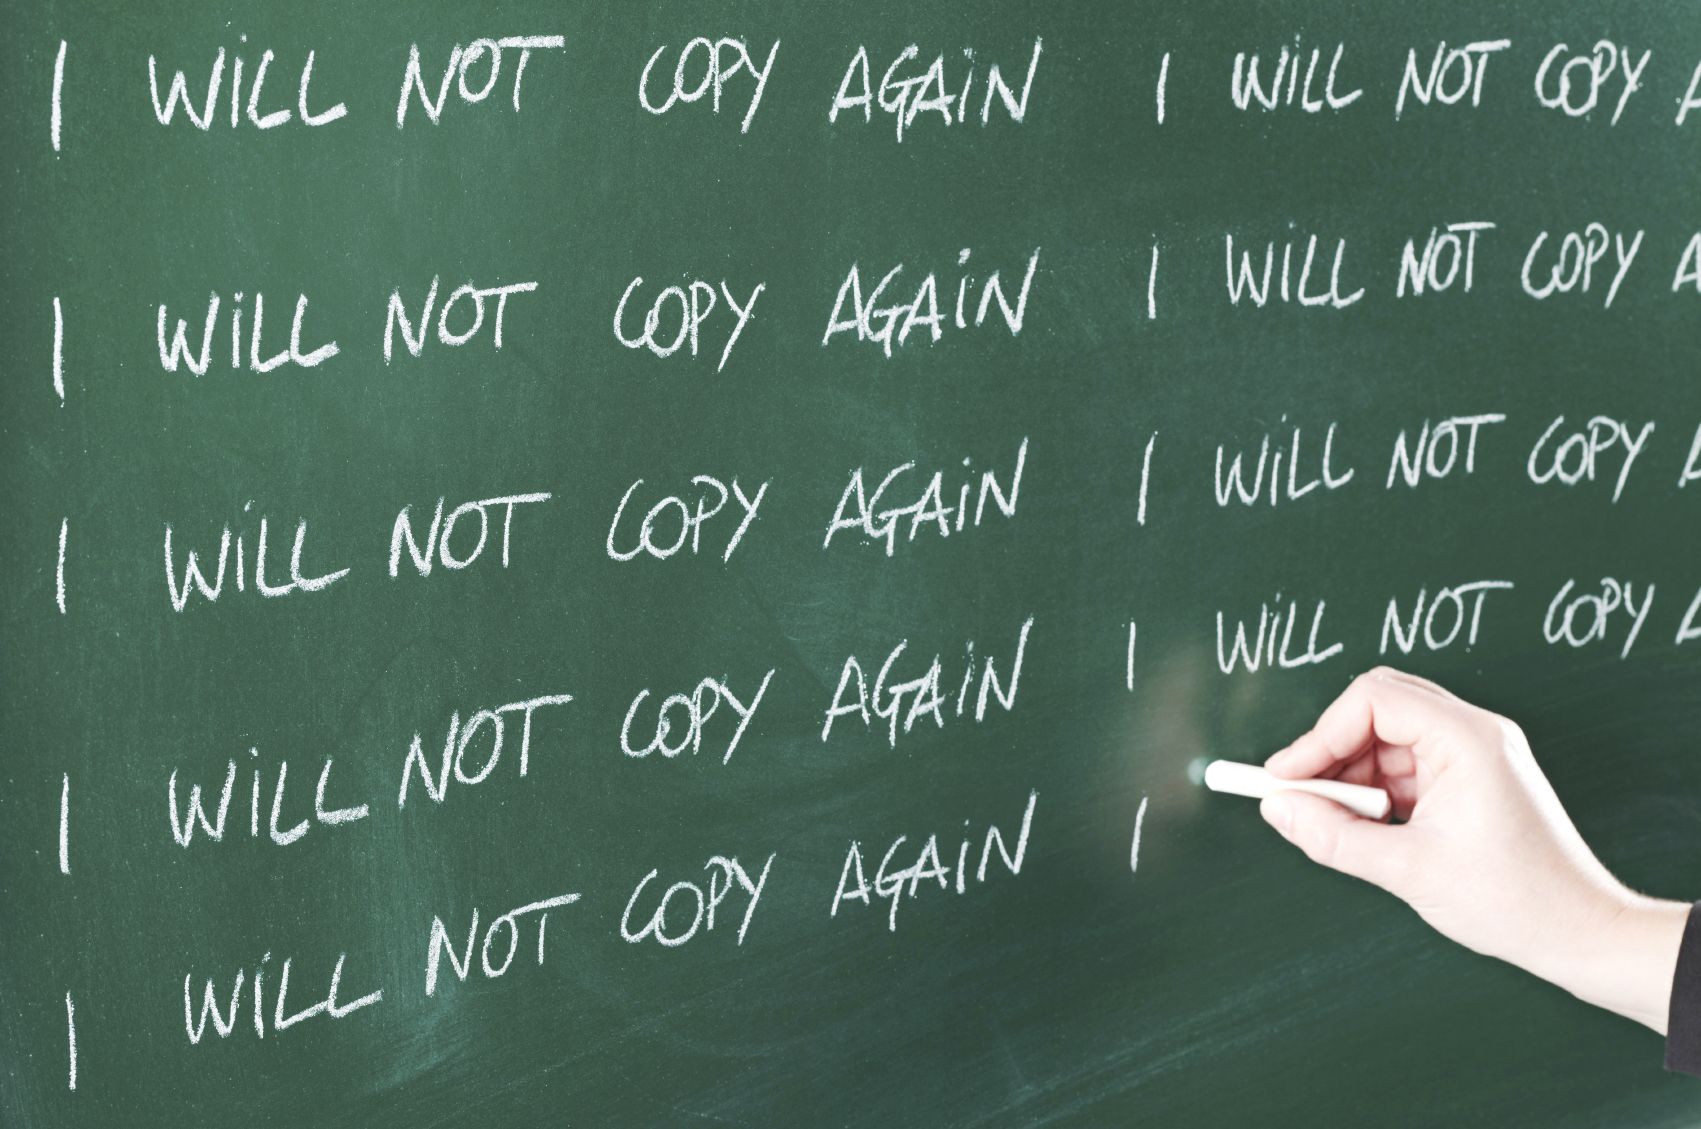 You’re Still Here: The pitfalls of plagiarism